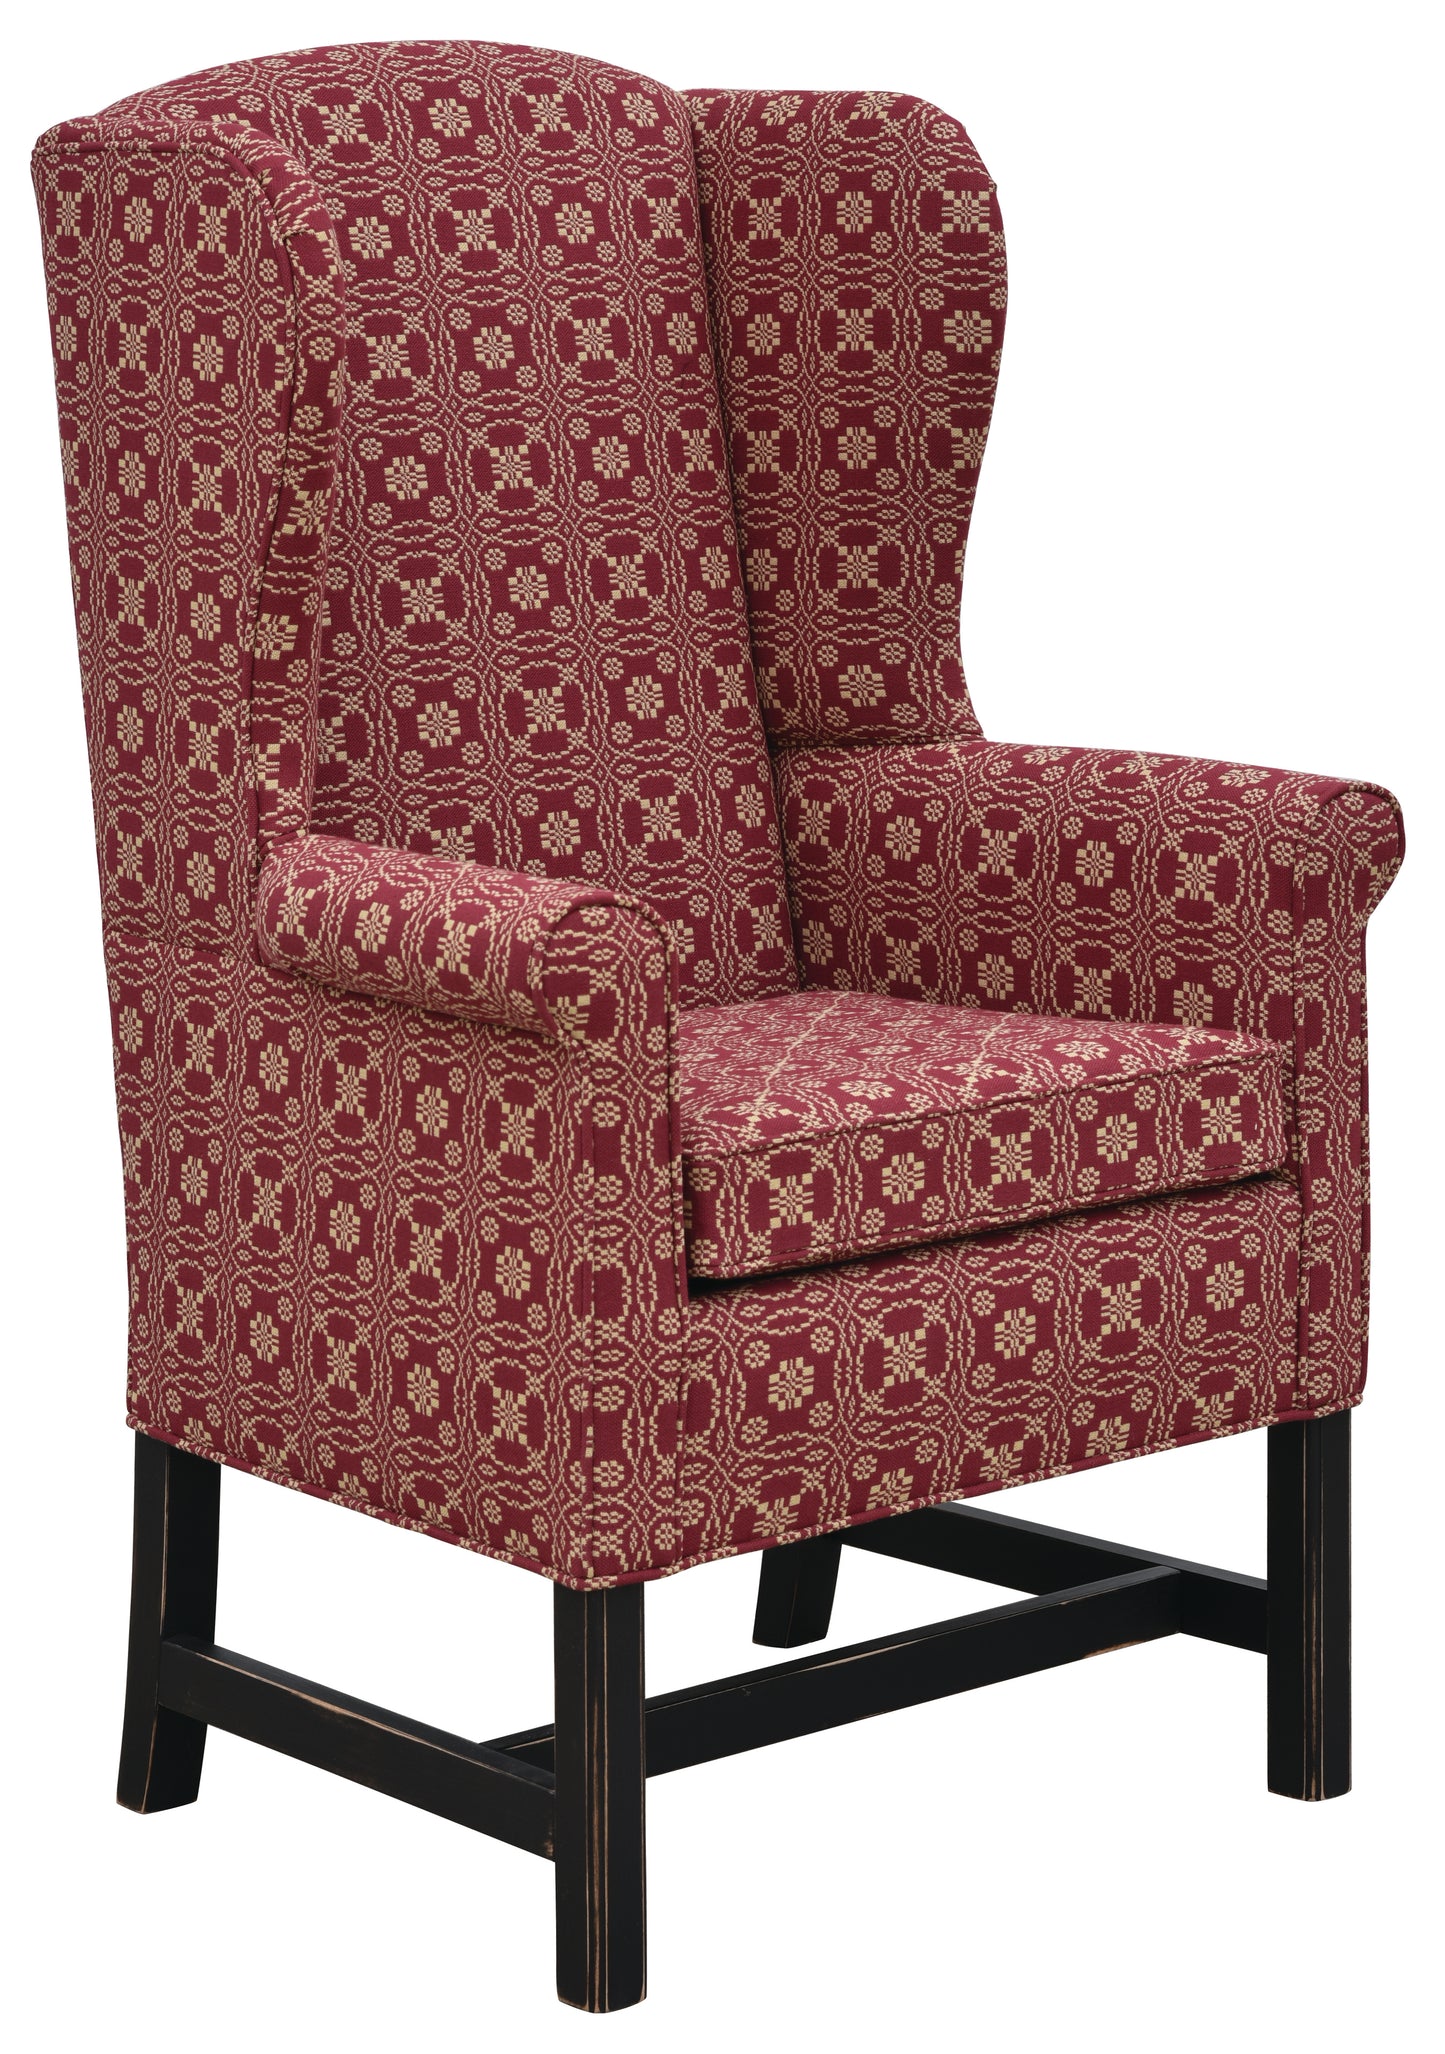 Library Wing Chair